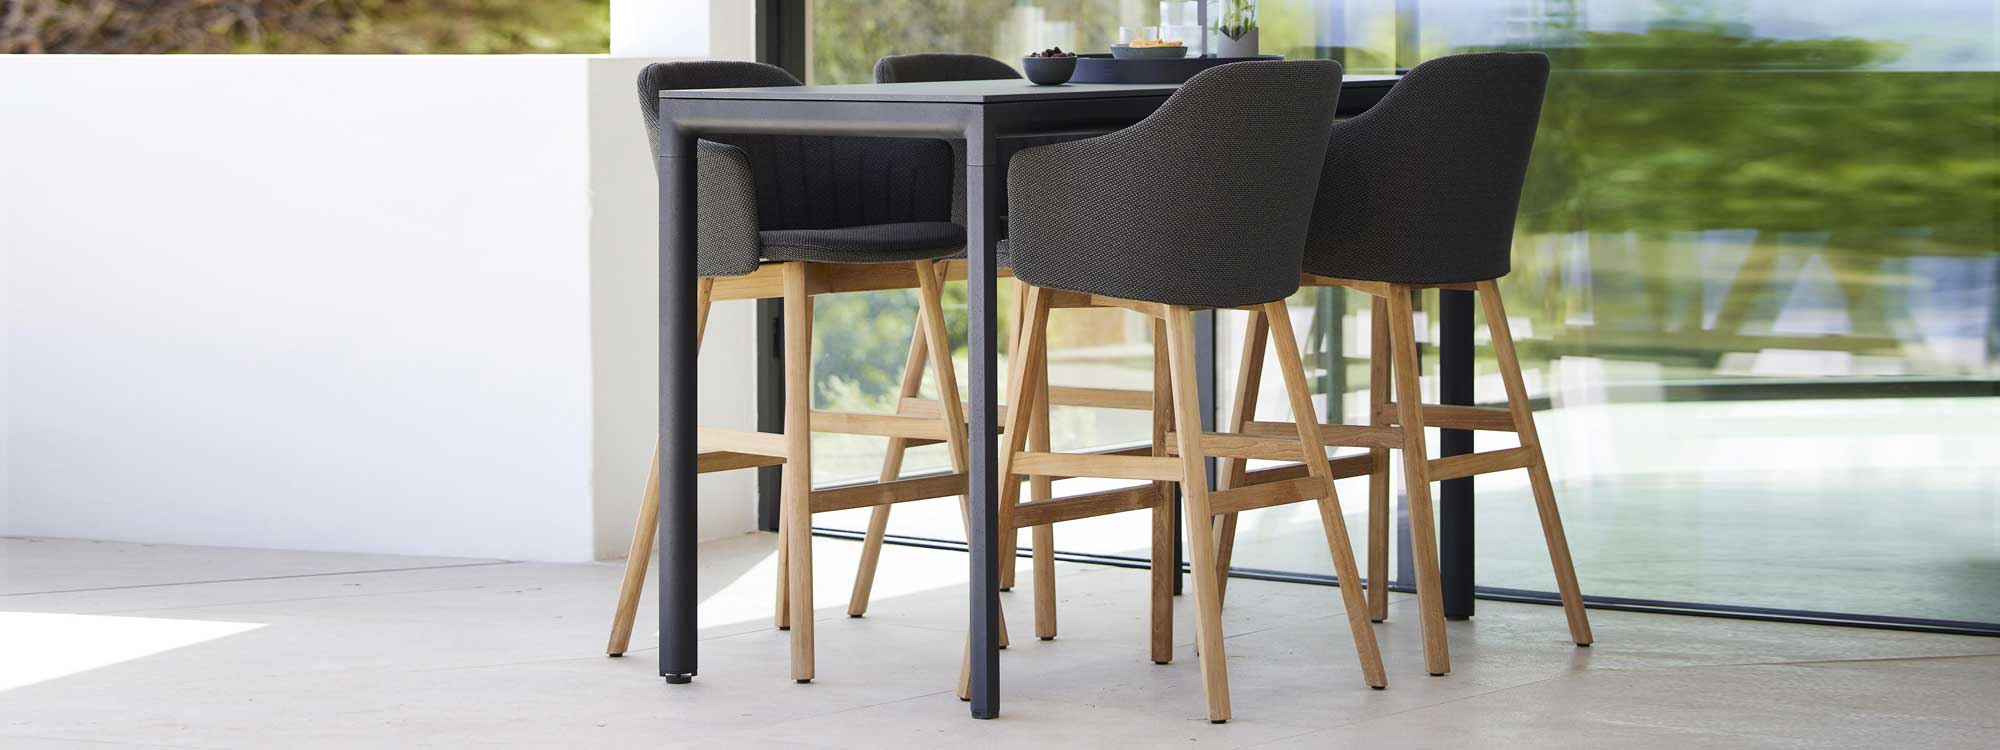 Image of Choice modern outdoor bar chairs with FSC teak legs and 100% recycled polypropylene shell, together with Drop bar table by Cane-line